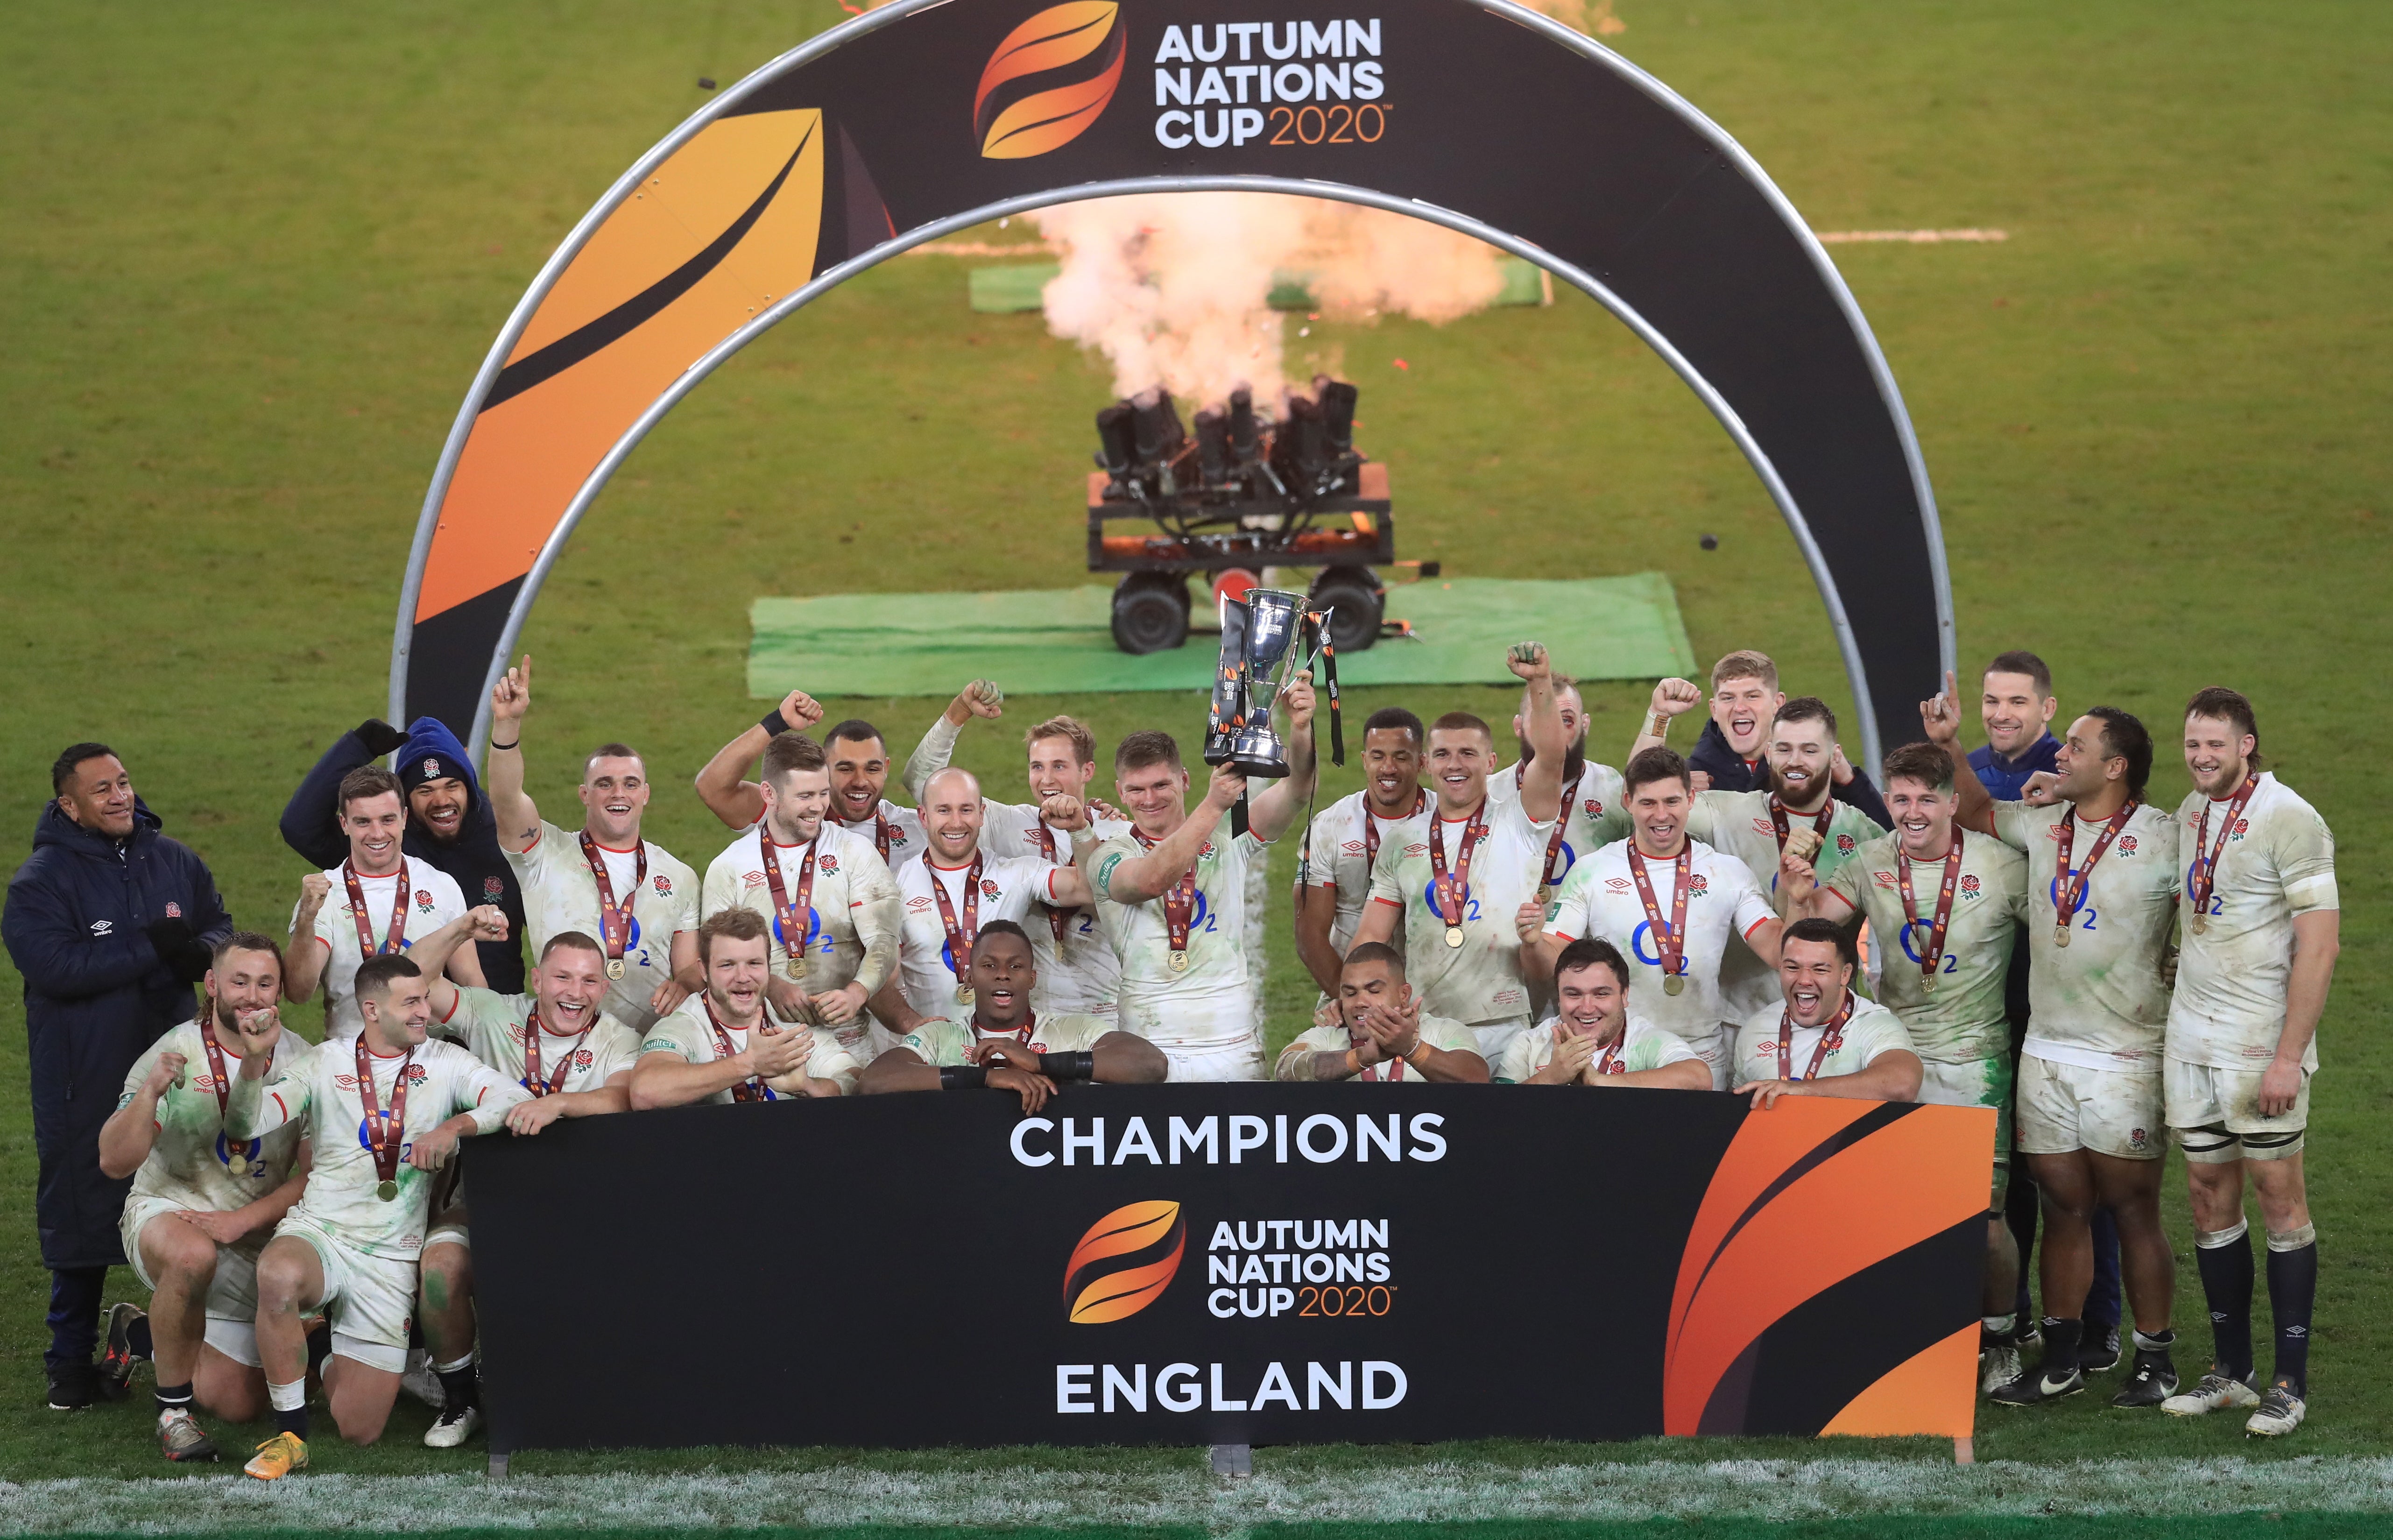 England fought from behind to win the Autumn Nations Cup final against France